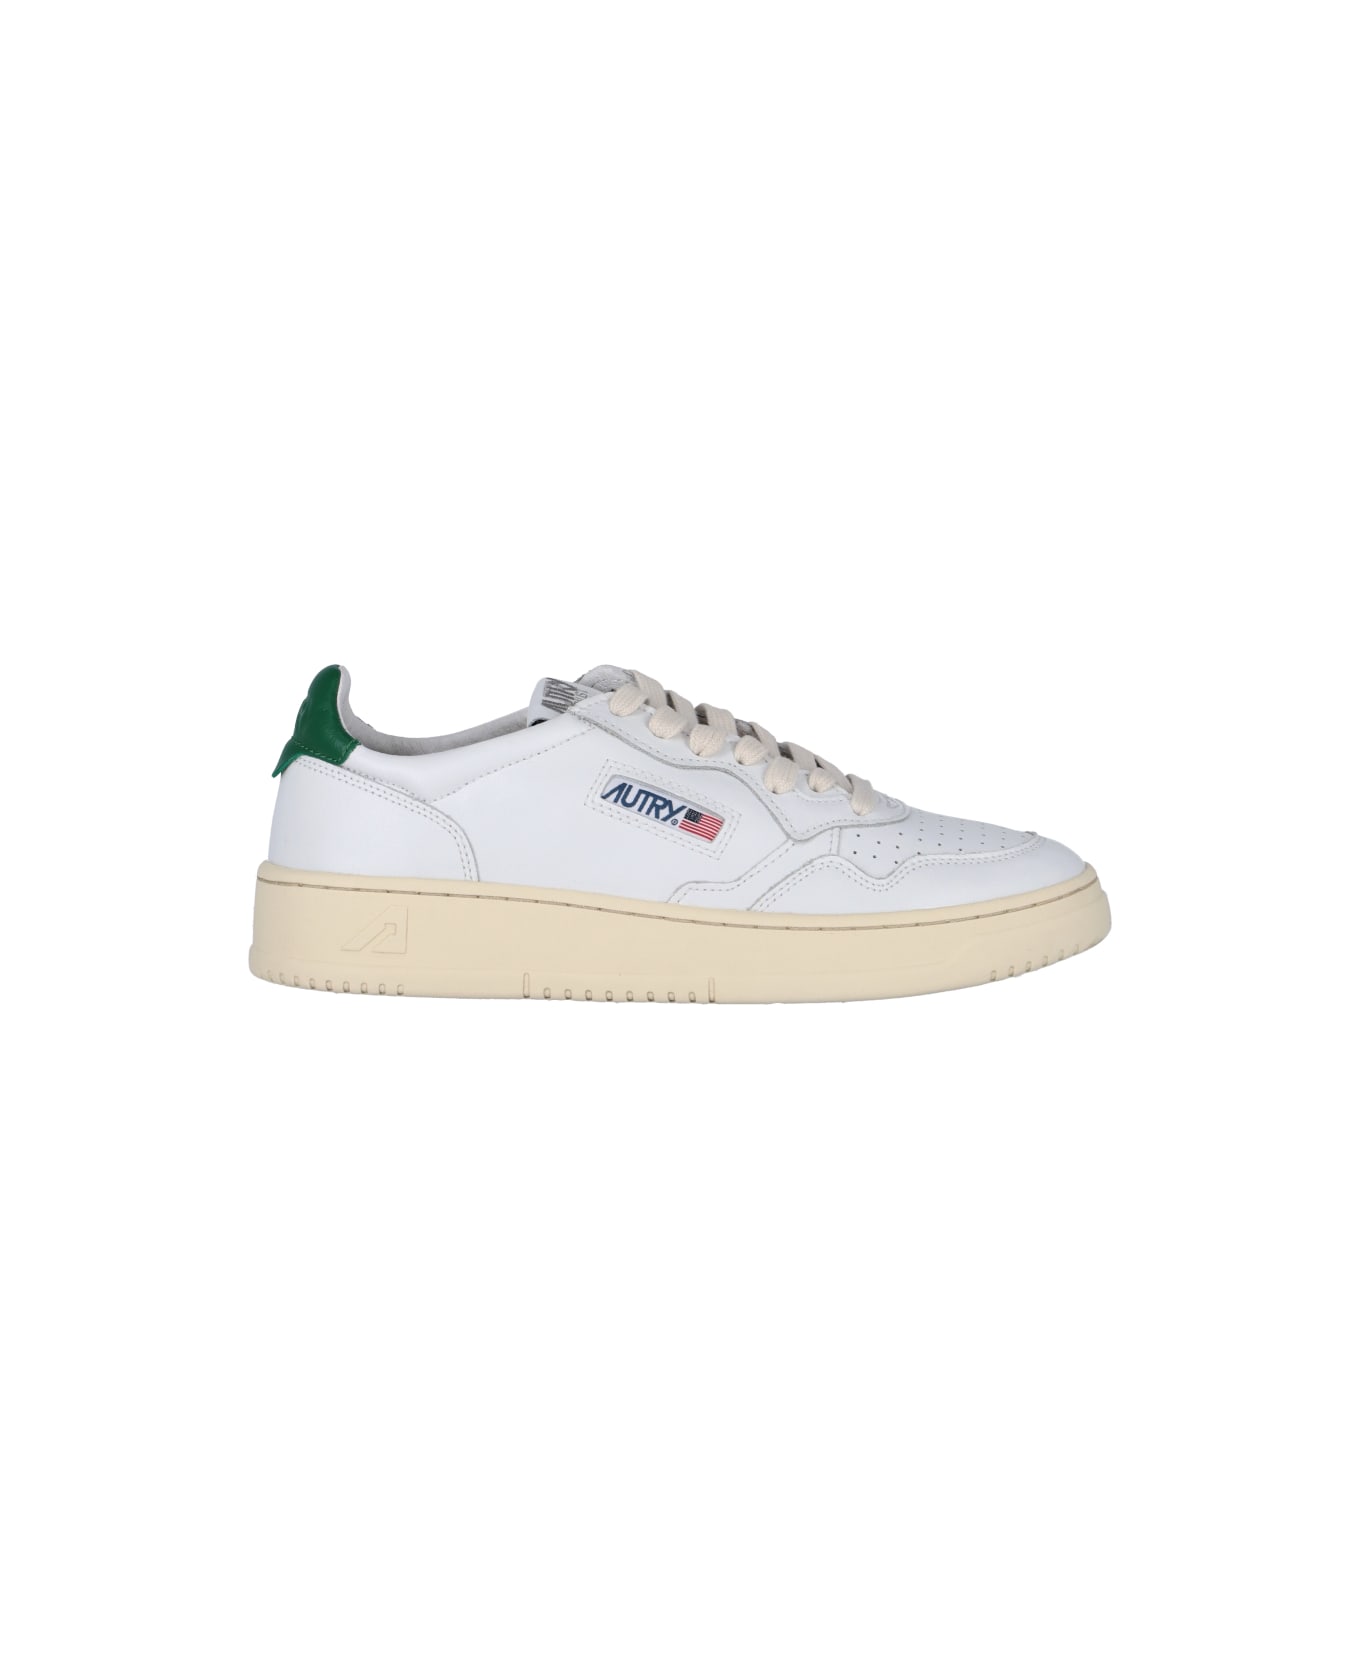 Autry Low Man Sneakers - Bianco スニーカー